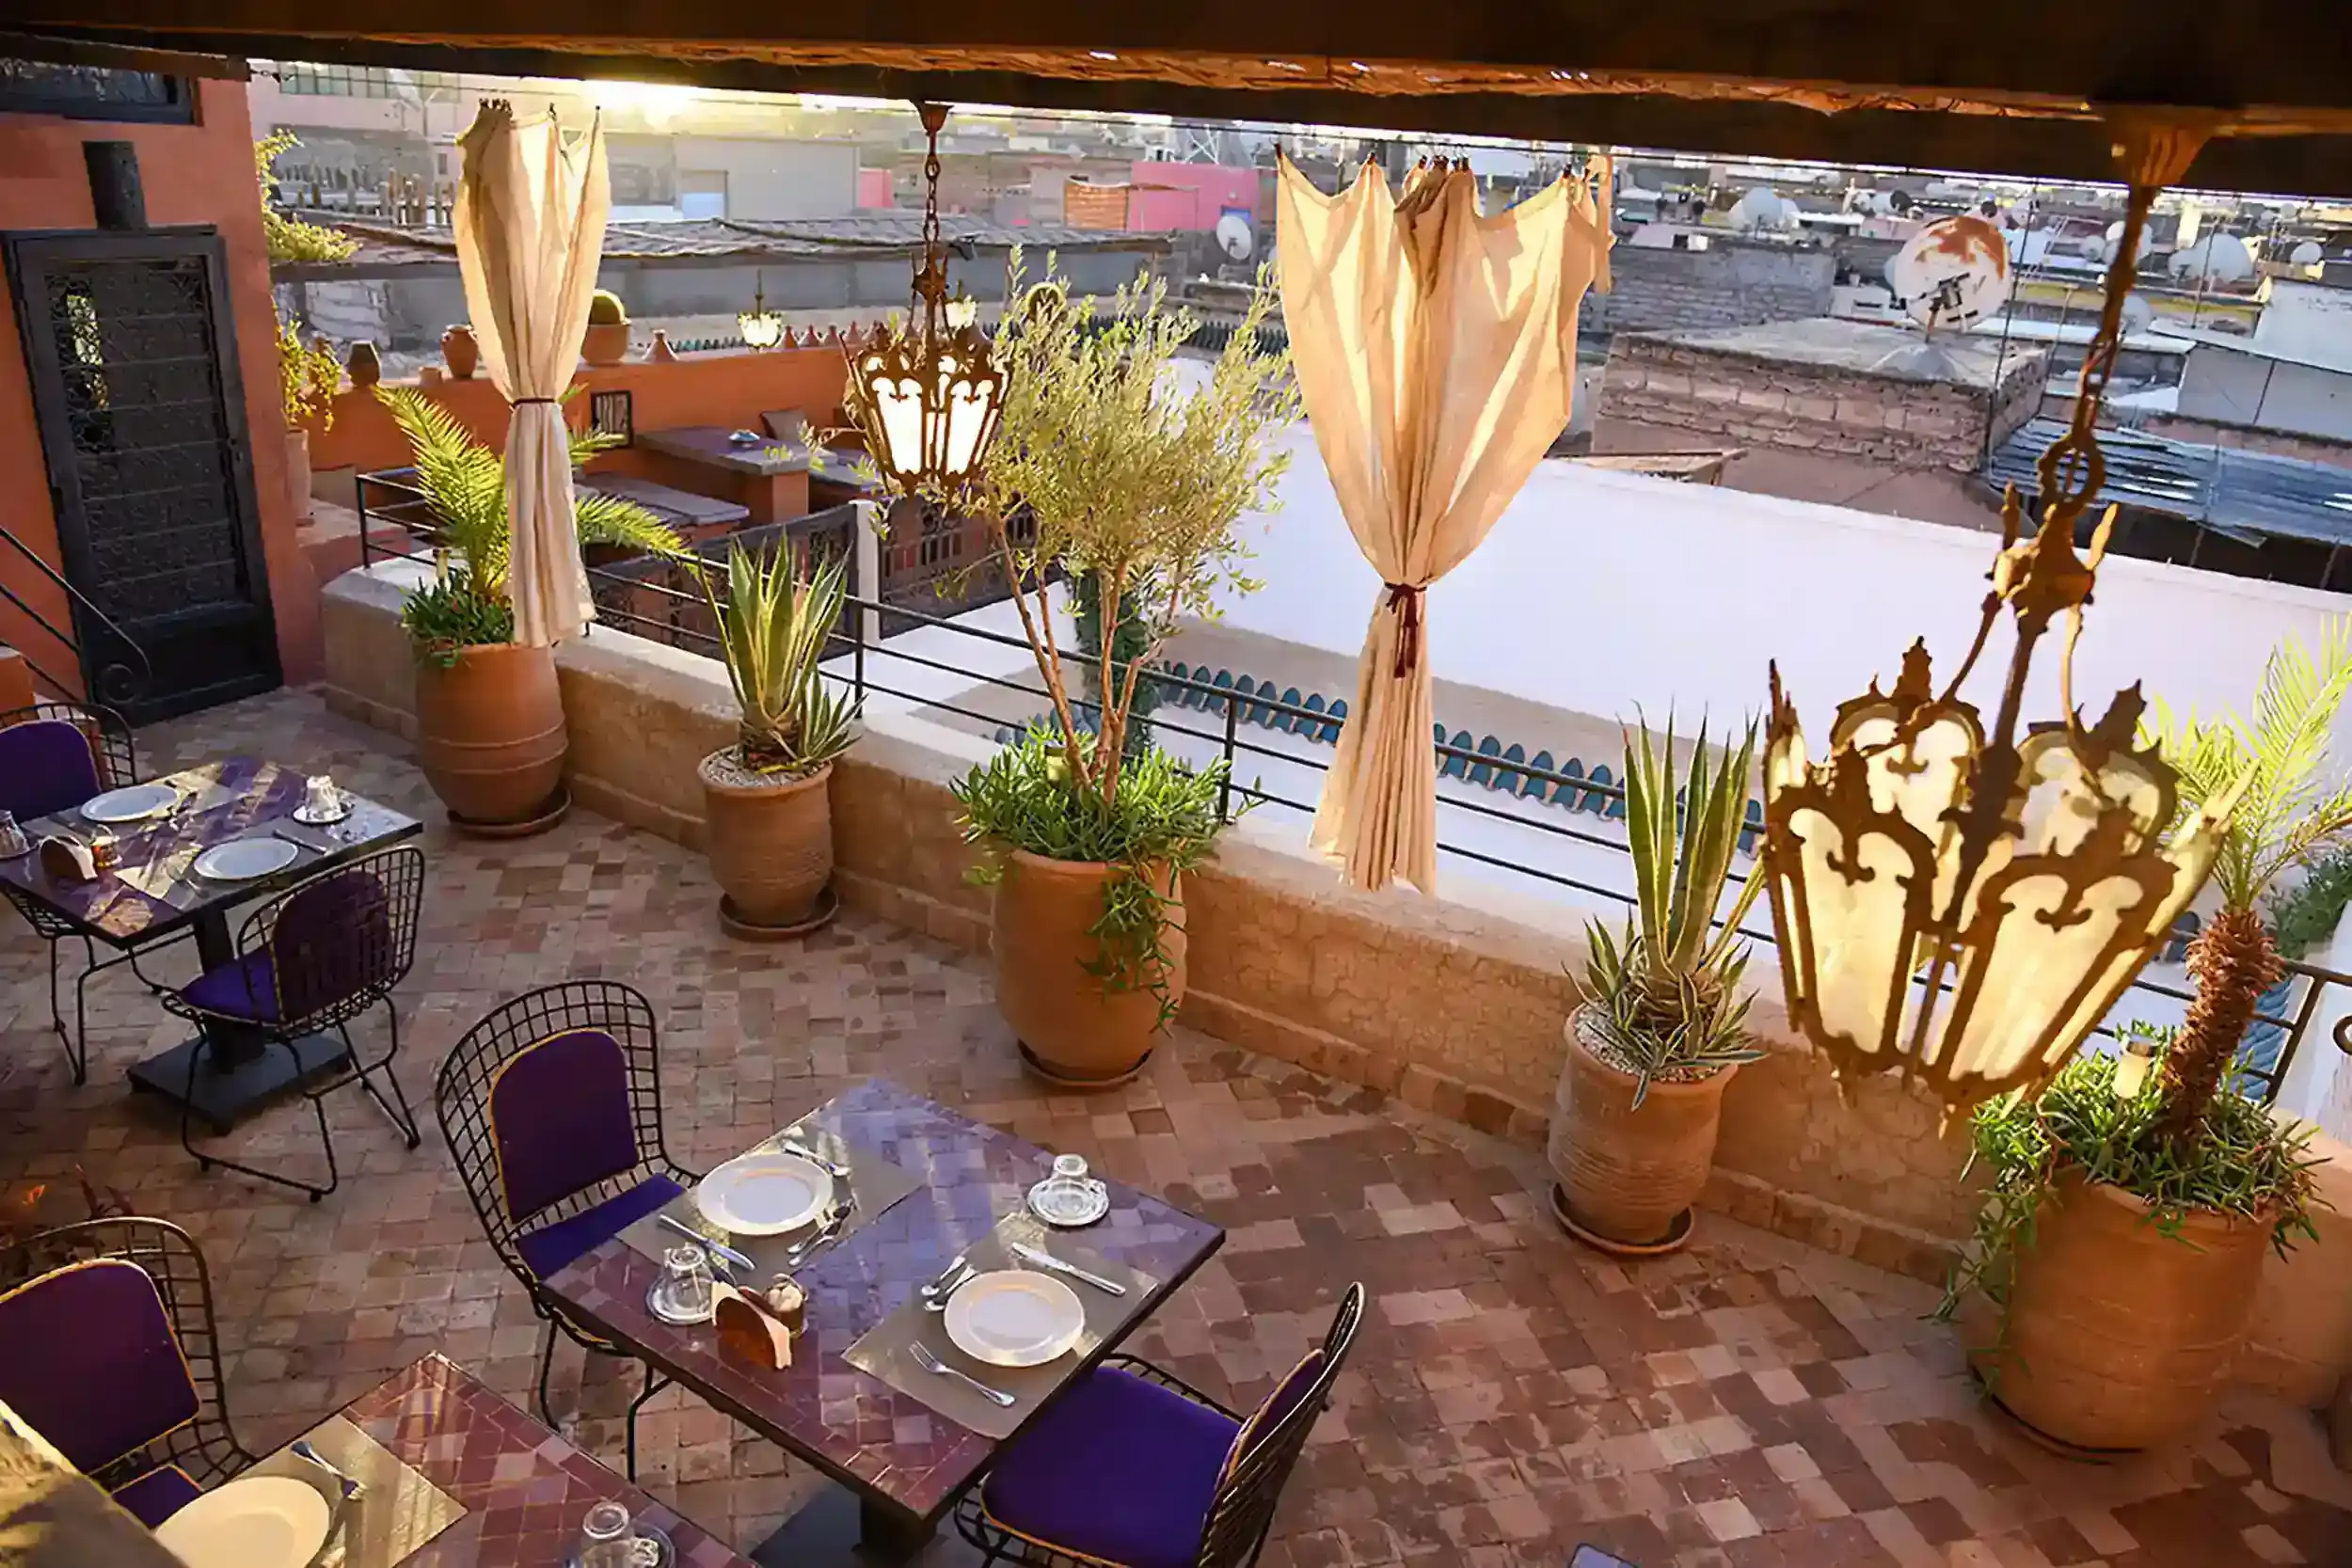 The terrace of our guesthouse, with a view of Marrakech rooftops and the Atlas Mountains.